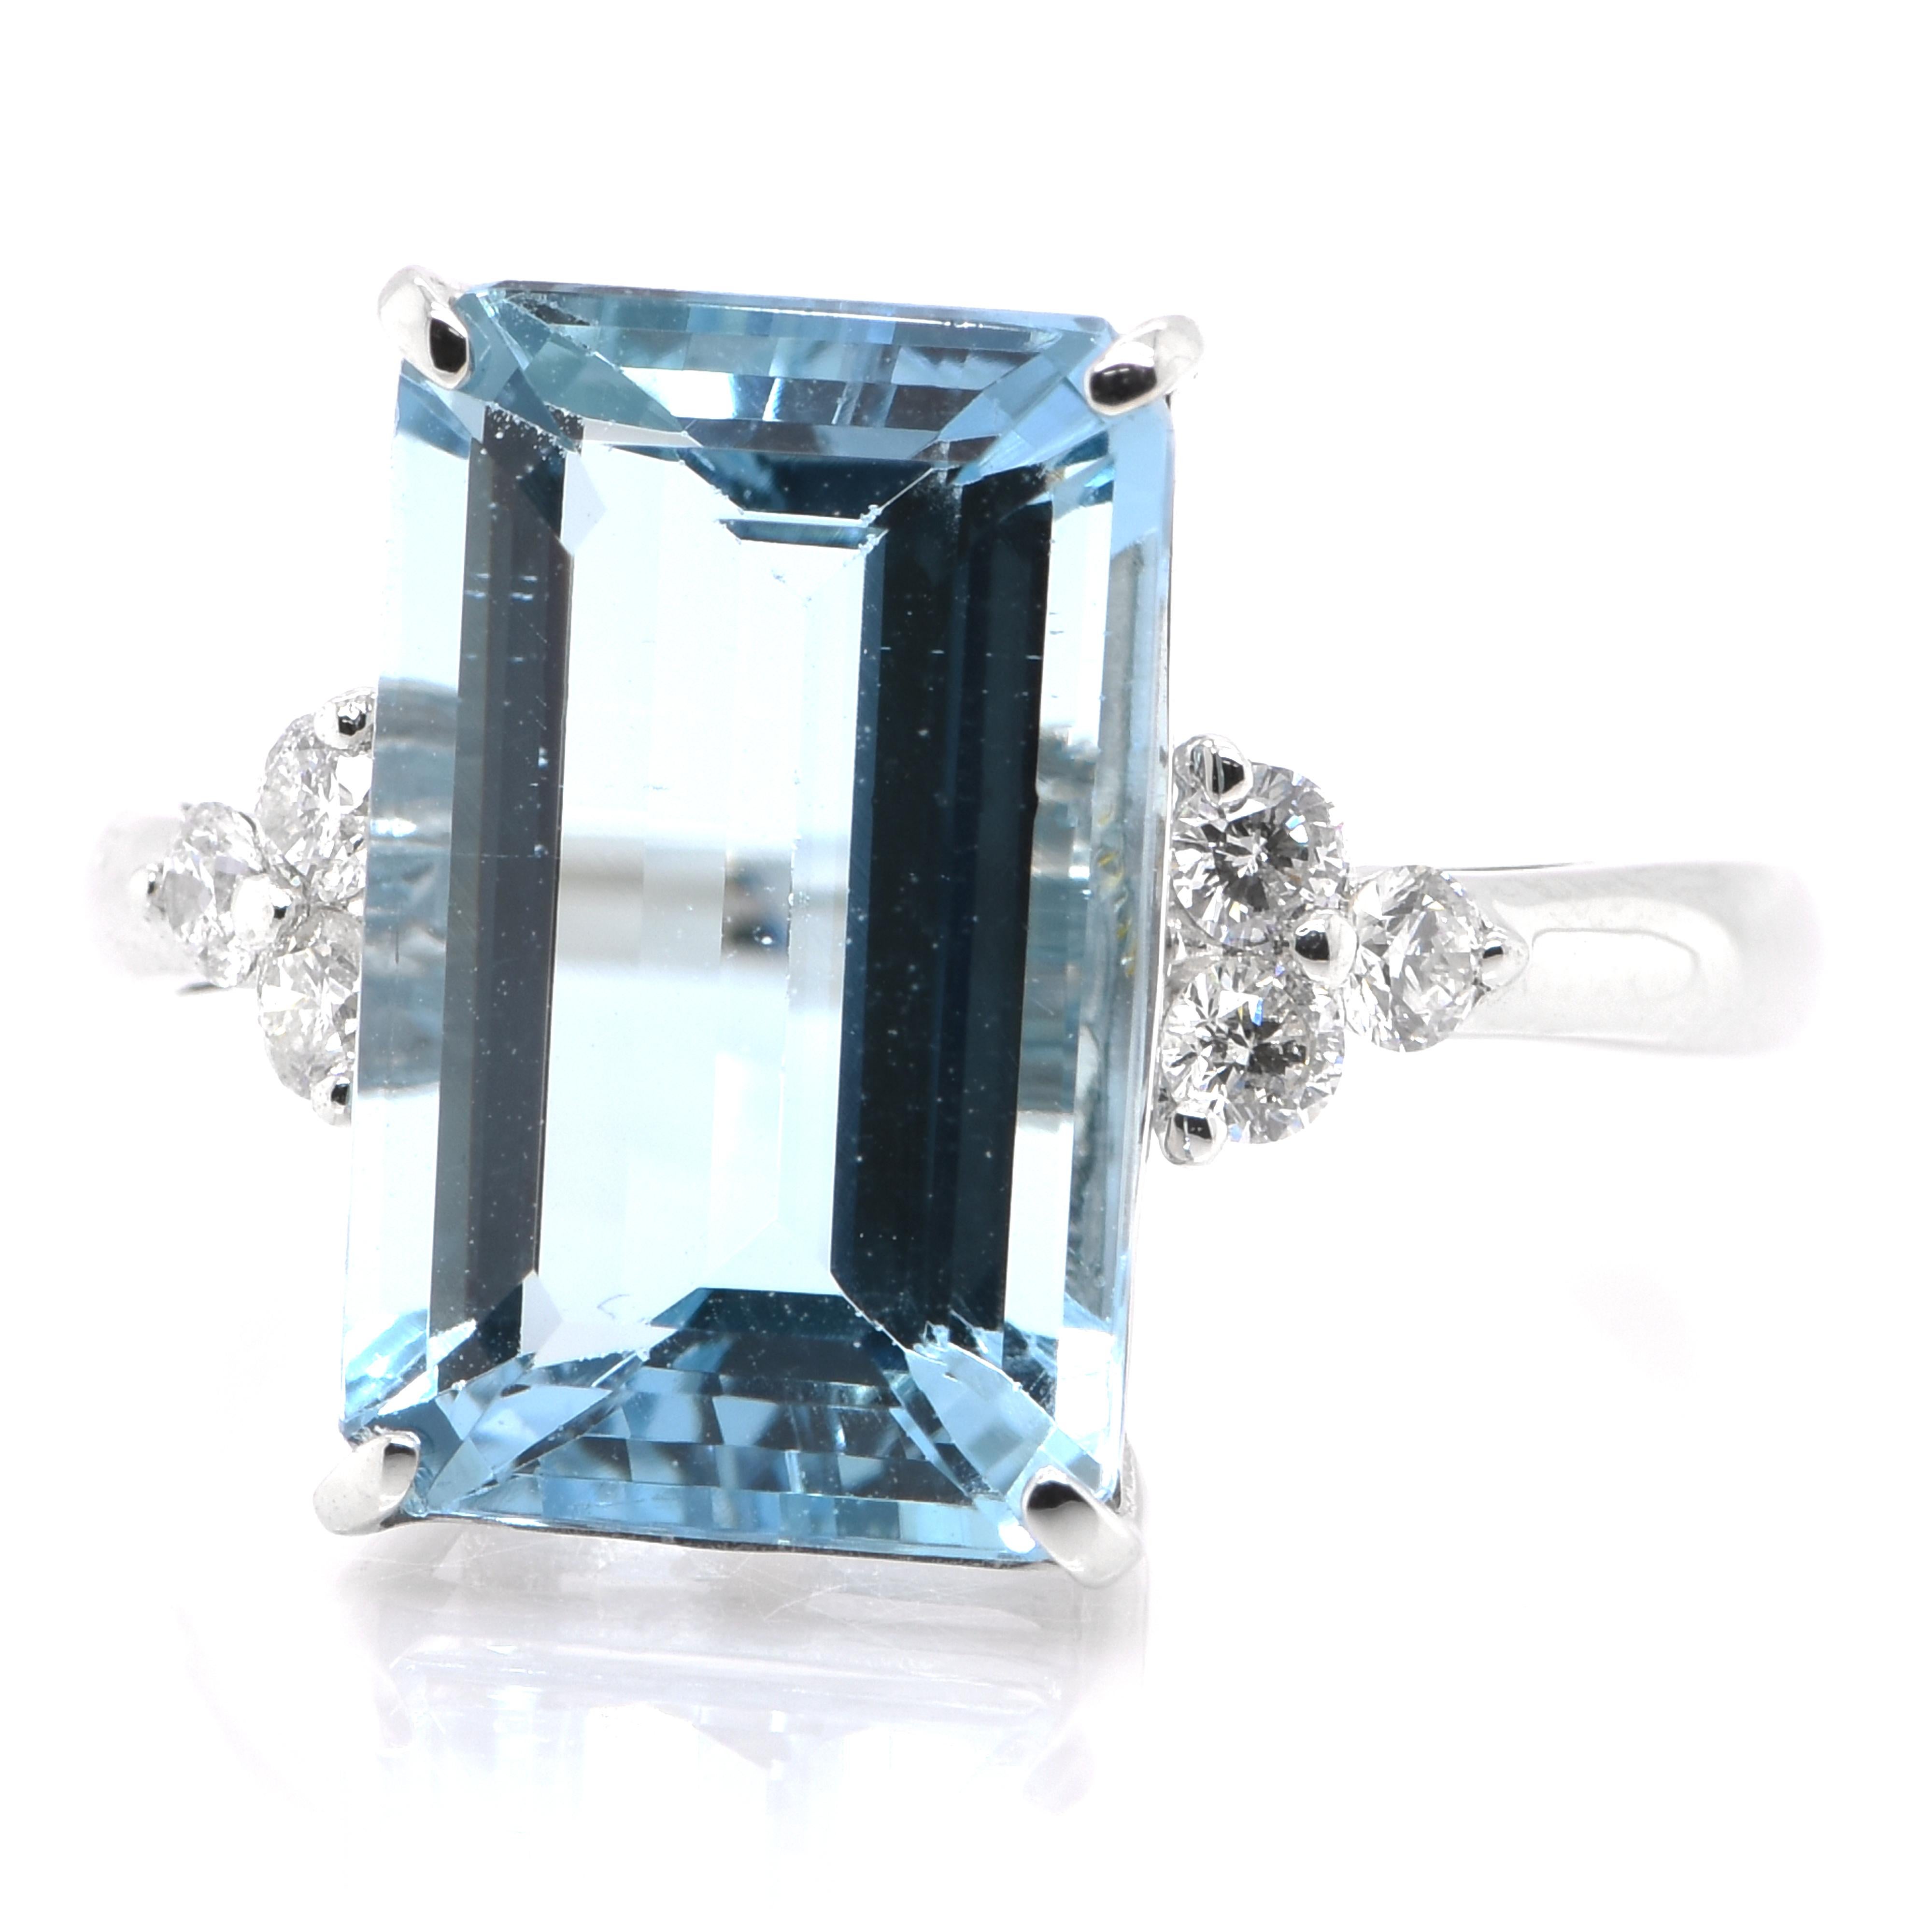 A beautiful Cocktail Ring featuring a 4.57 Carat, Natural, Aquamarine and 0.22 Carats of Diamond Accents set in Platinum. Aquamarines have been prized gems throughout human history for their cool blue color. They historically come from the Minas